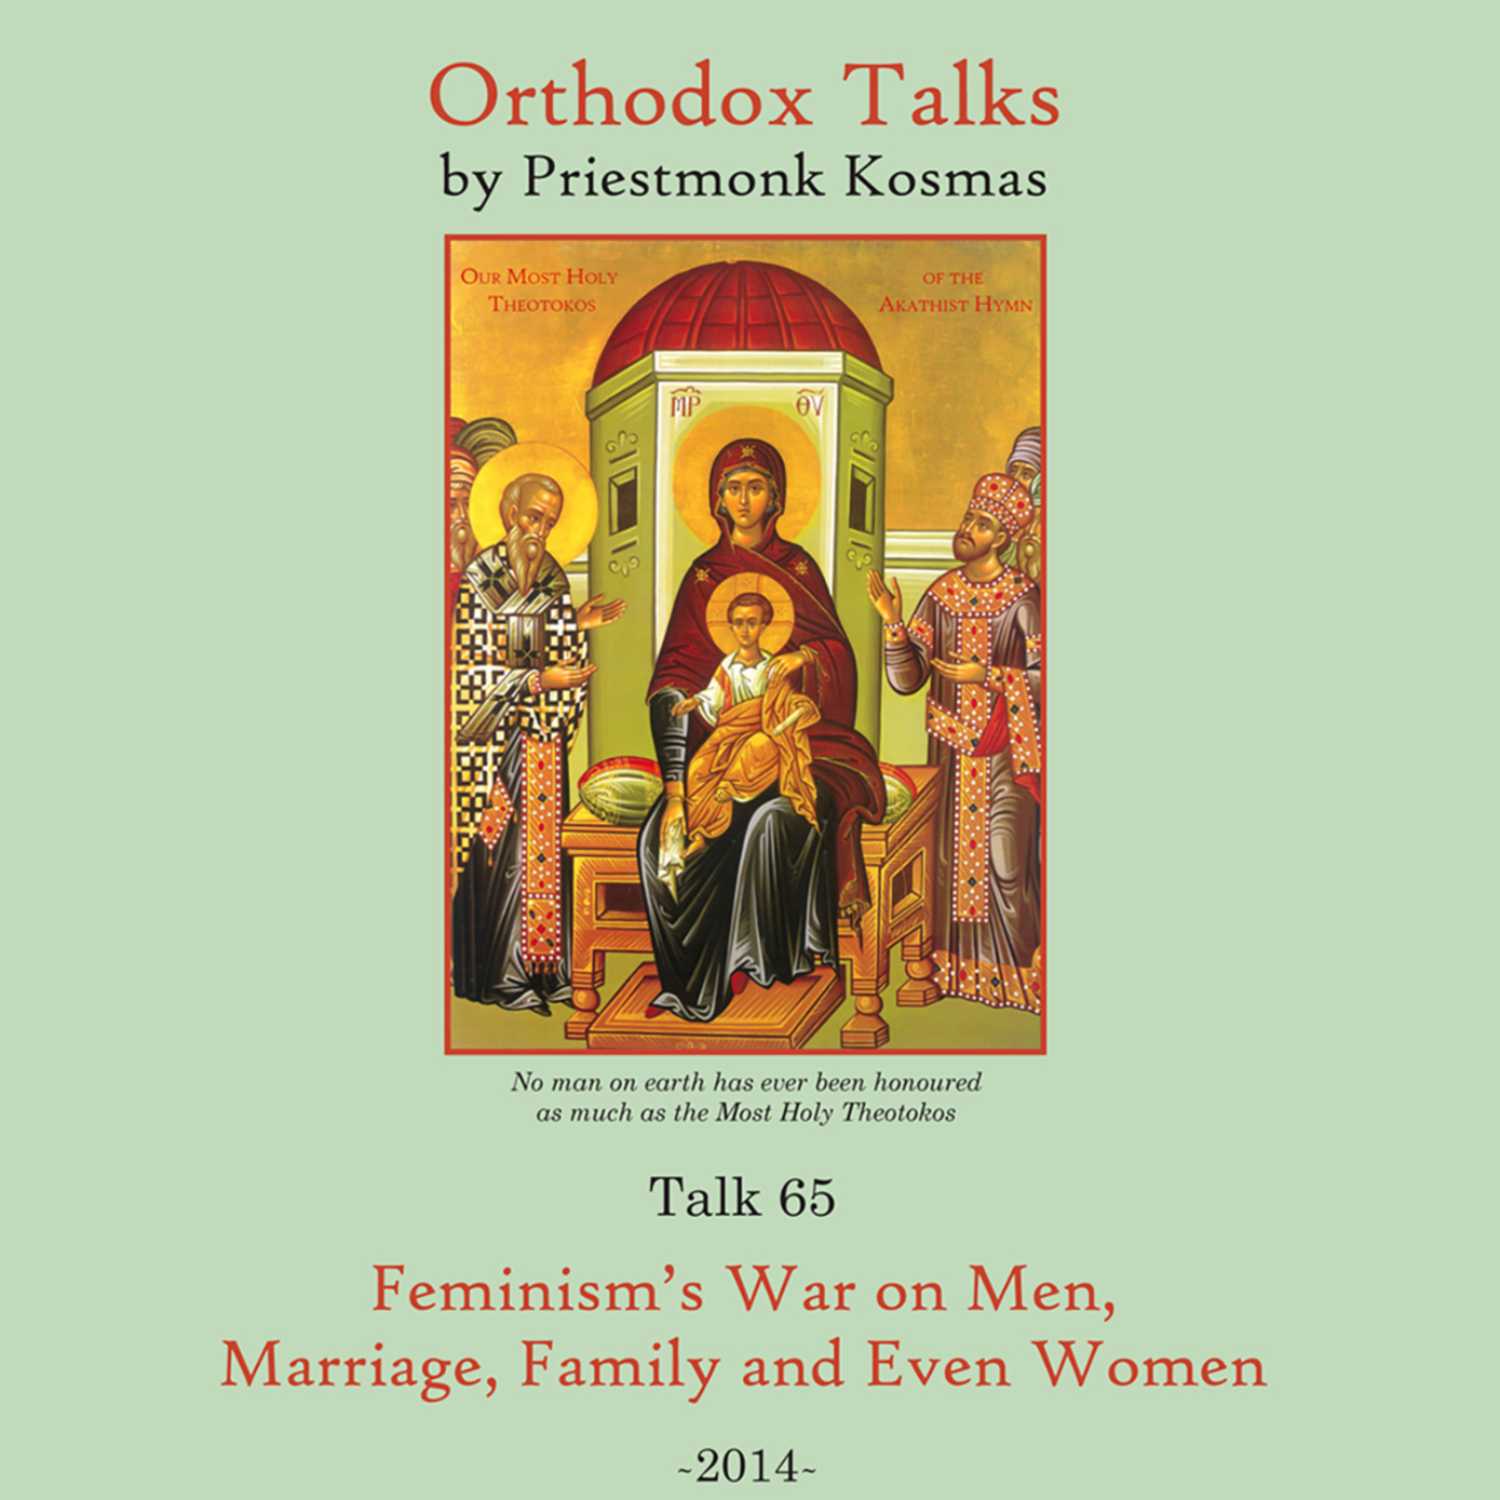 Talk 65: Feminism's War on Men, Marriage, Family and Even Women